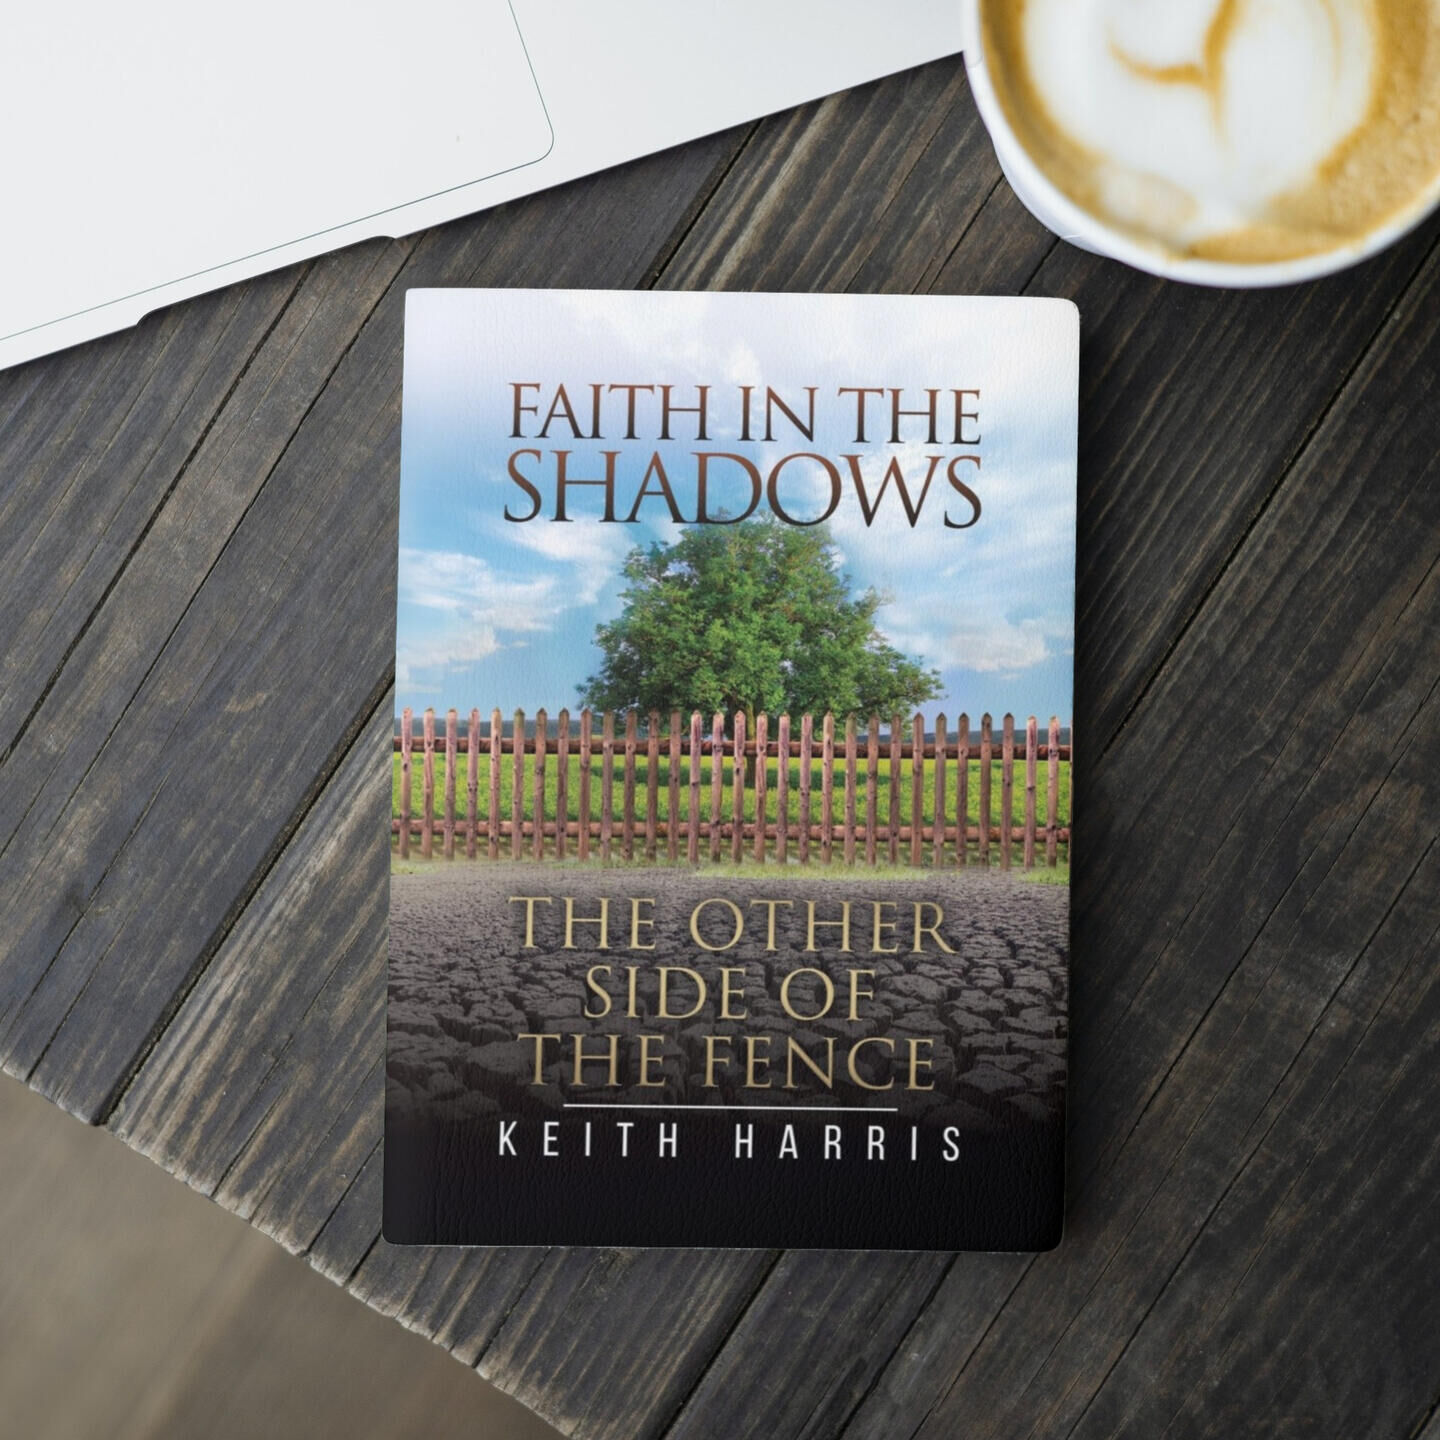 Faith in the Shadows - the other side of the fence